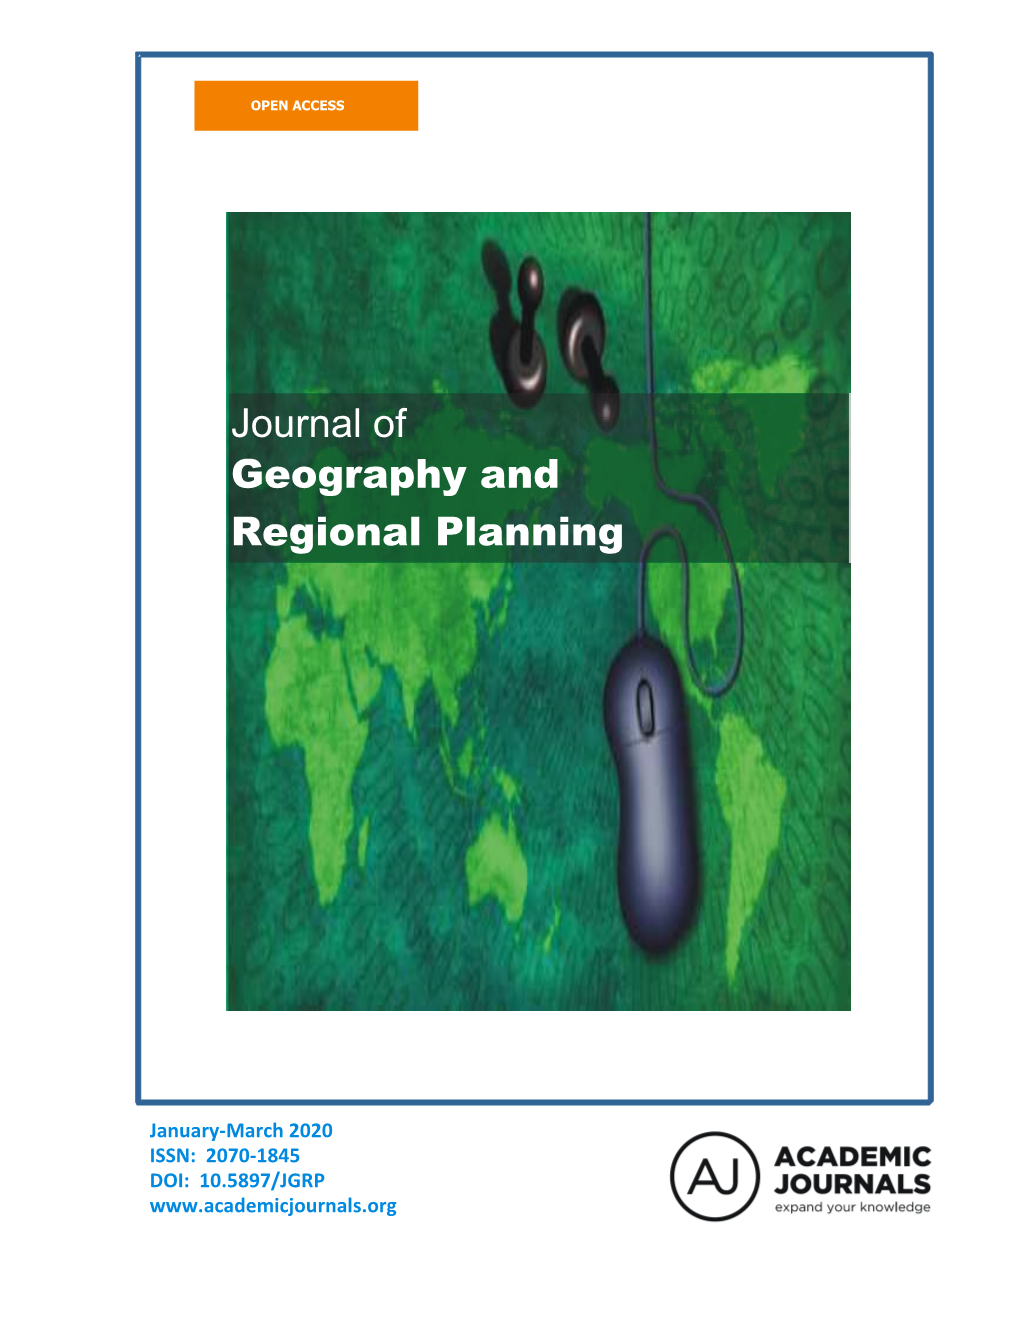 Journal of Geography and Regional Planning